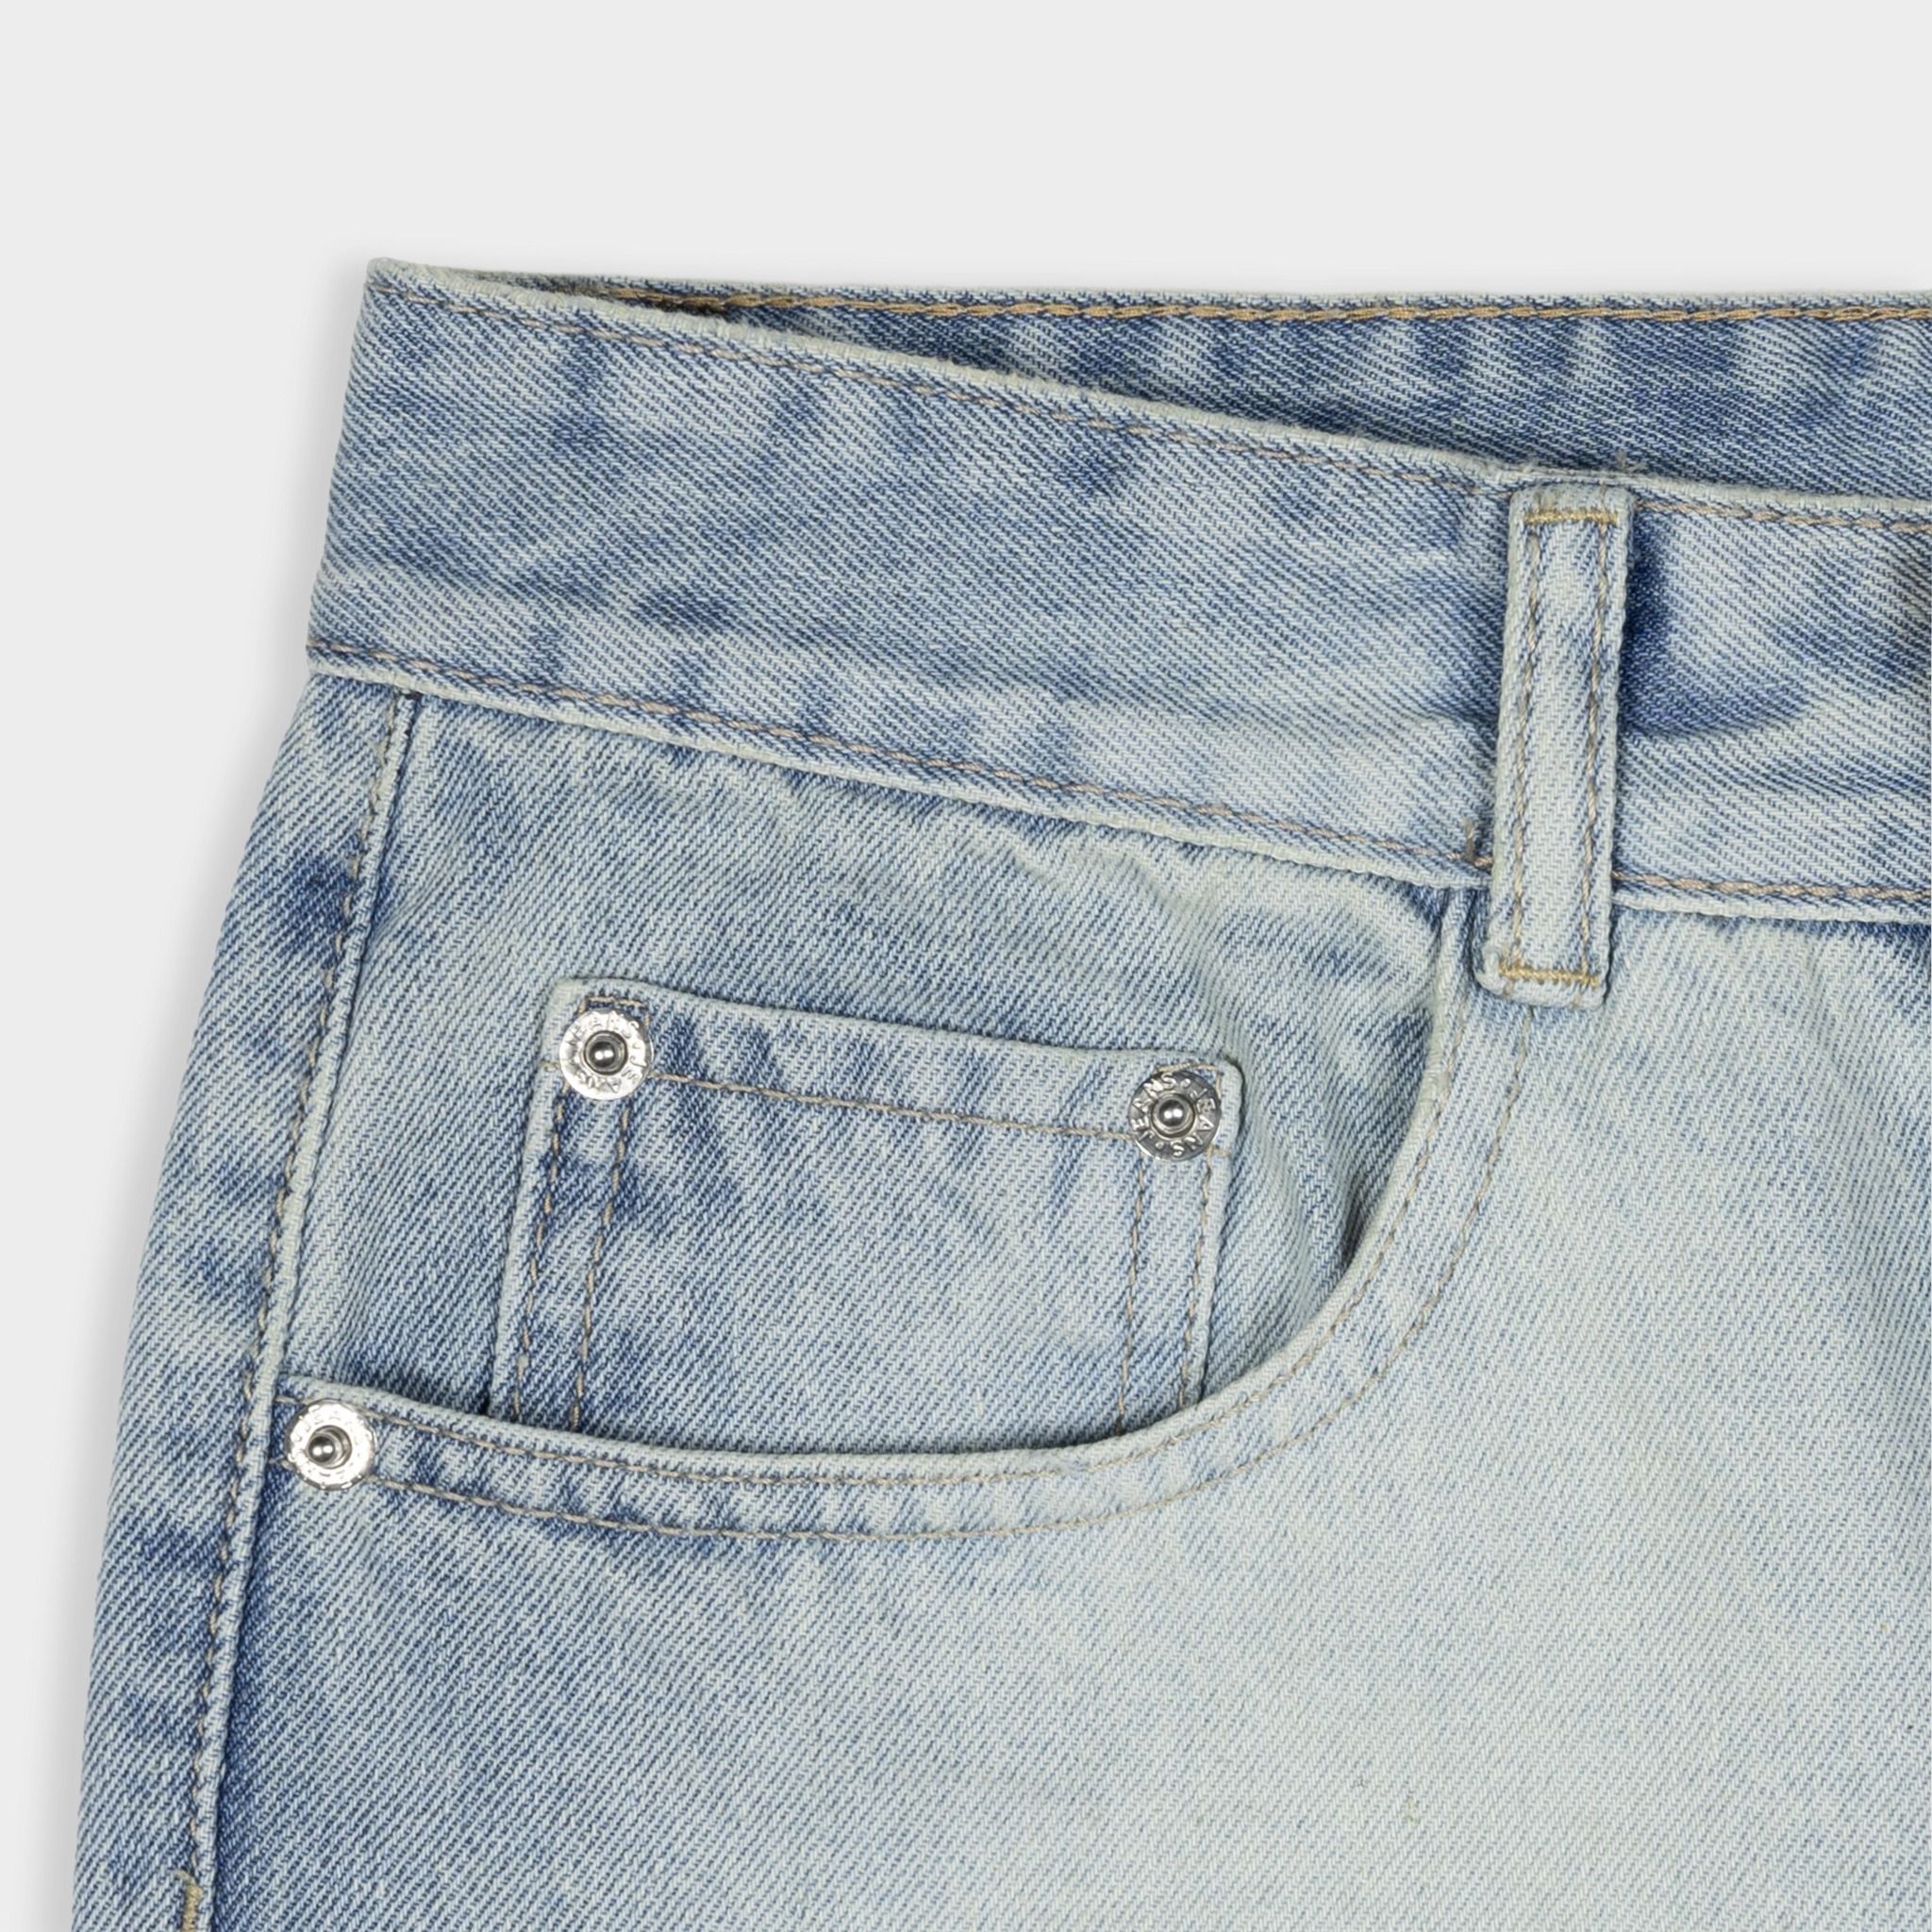  Outerity Jean Bottom Up Form Unisex  /  Đen Wash 